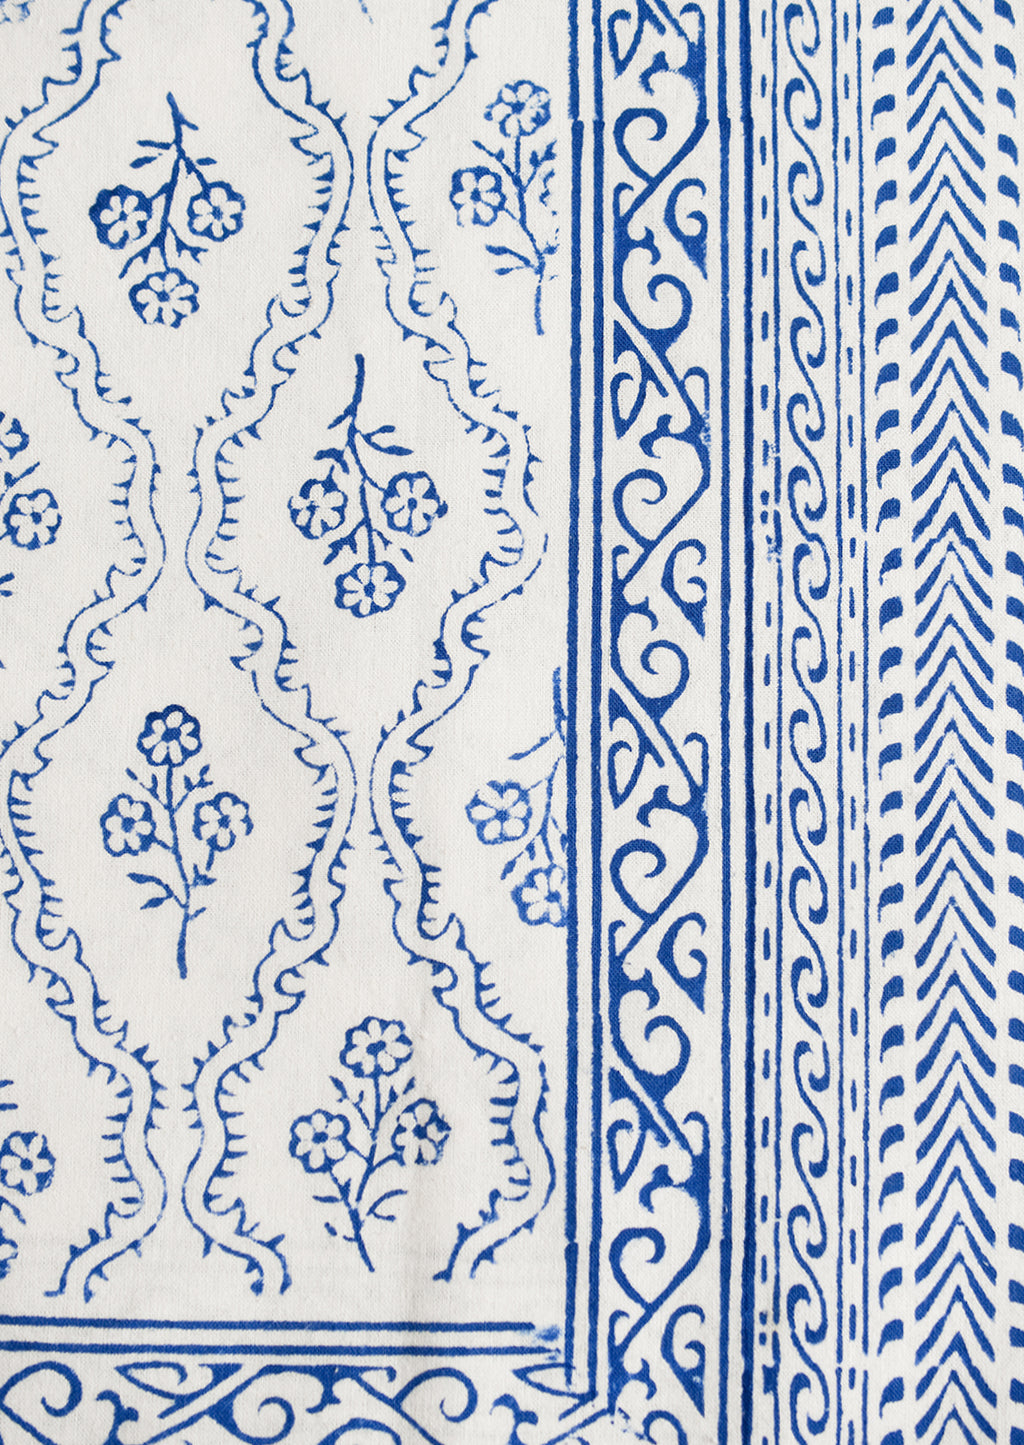 2: A blue and white block printed, floral print tablecloth.